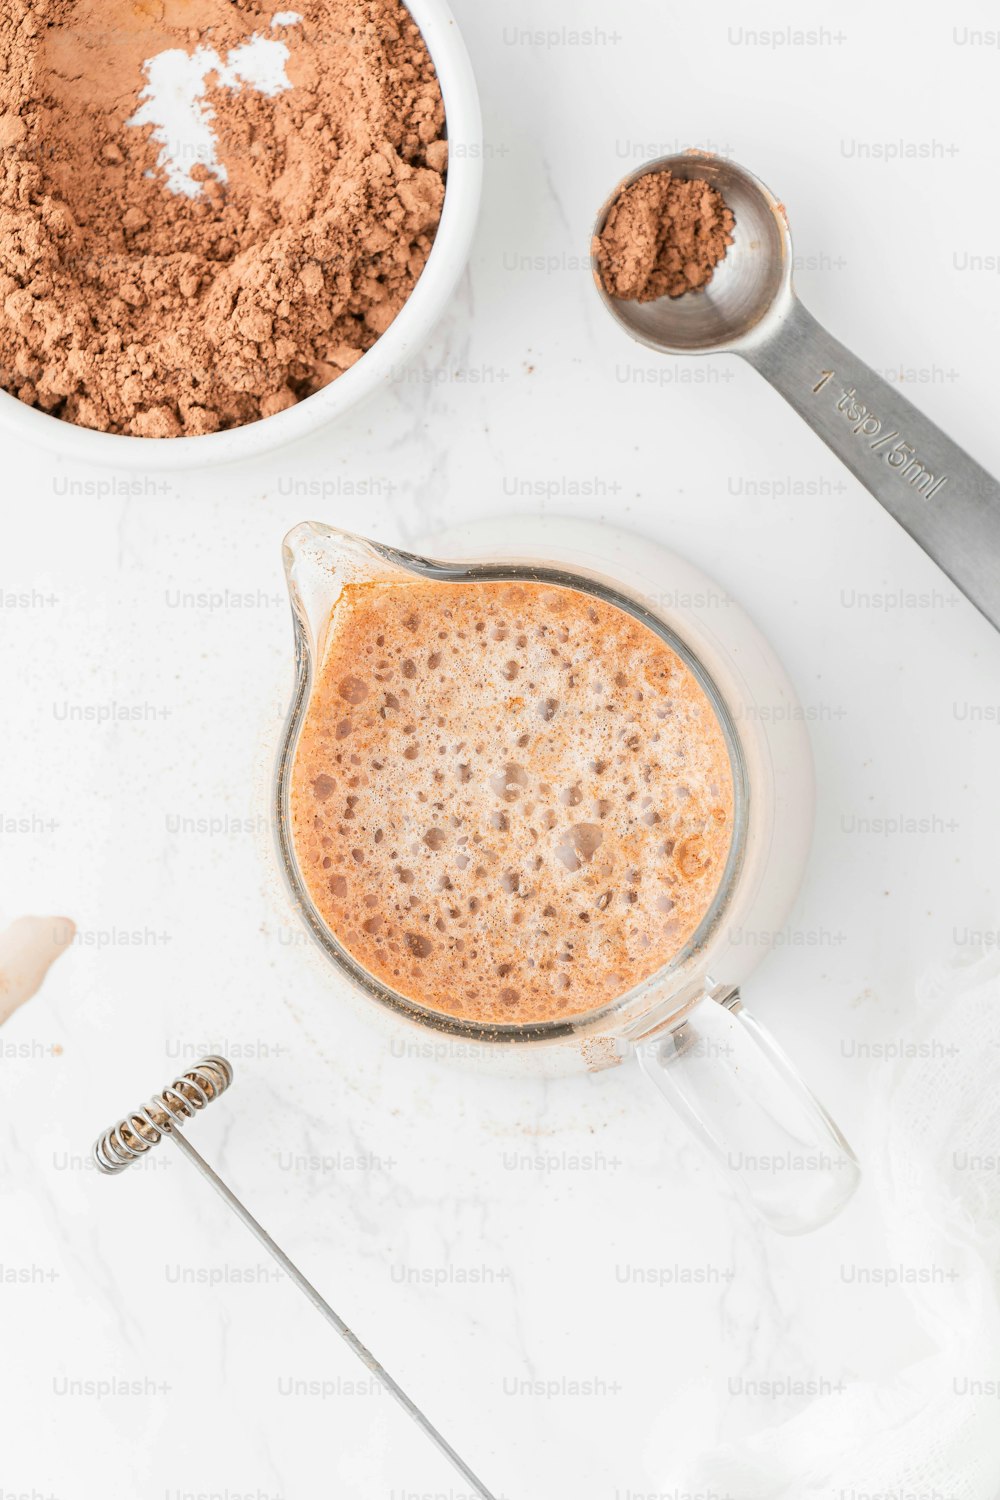 a bowl of cocoa next to a measuring spoon